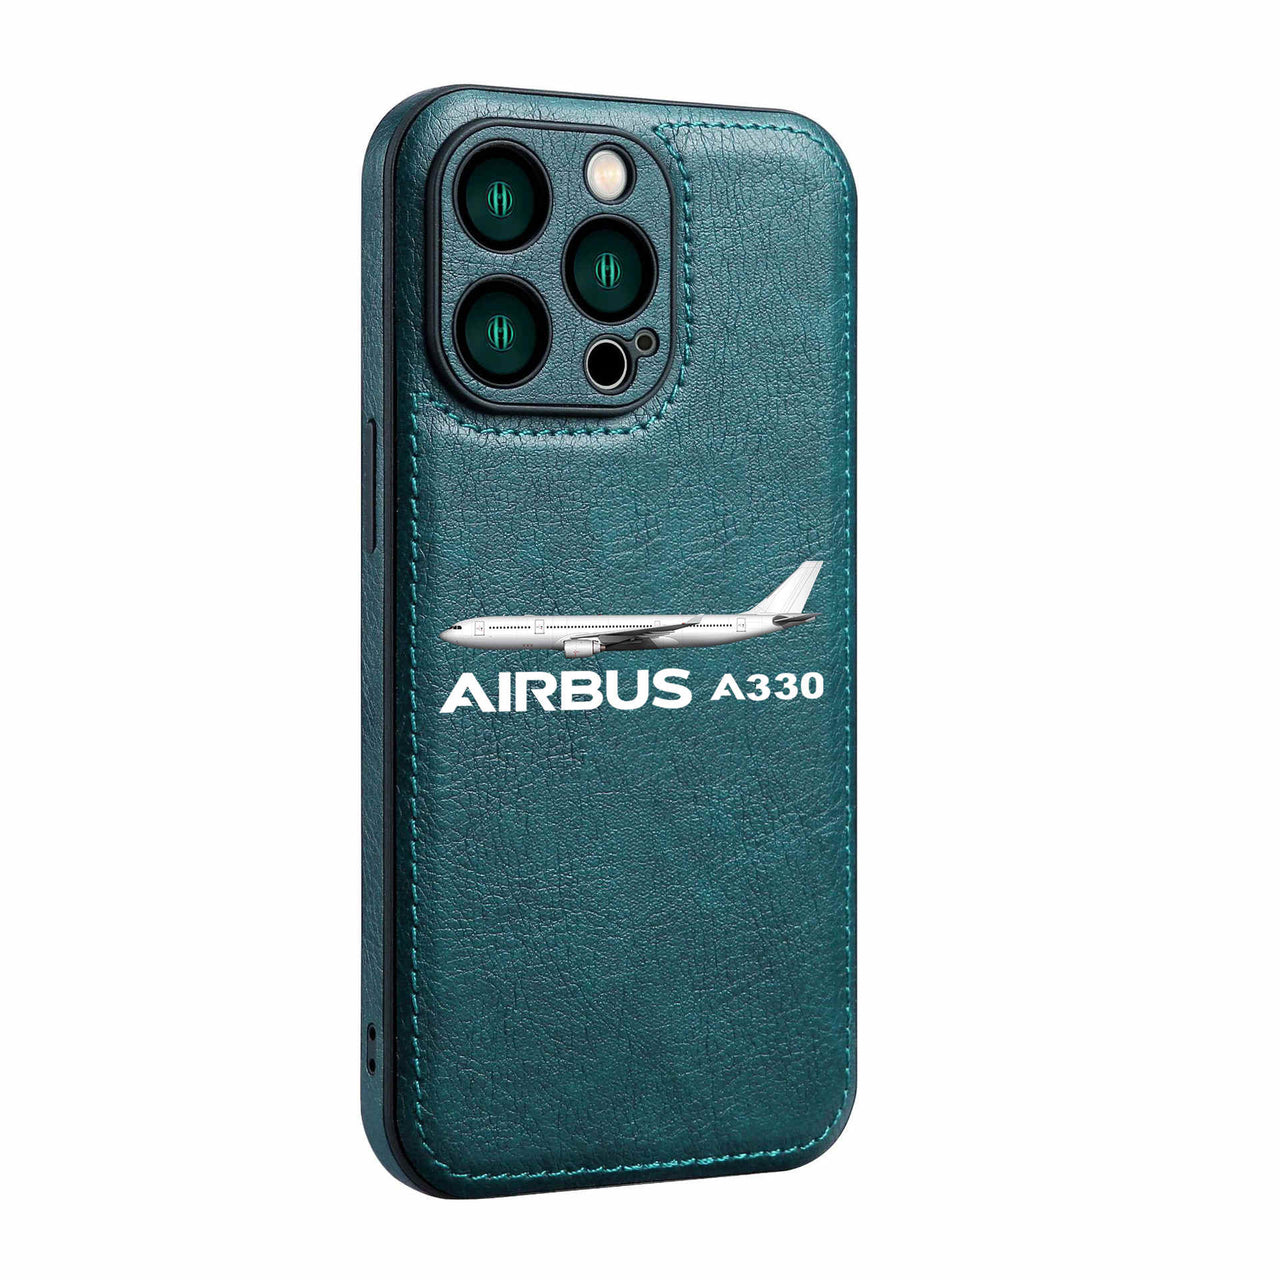 The Airbus A330 Designed Leather iPhone Cases